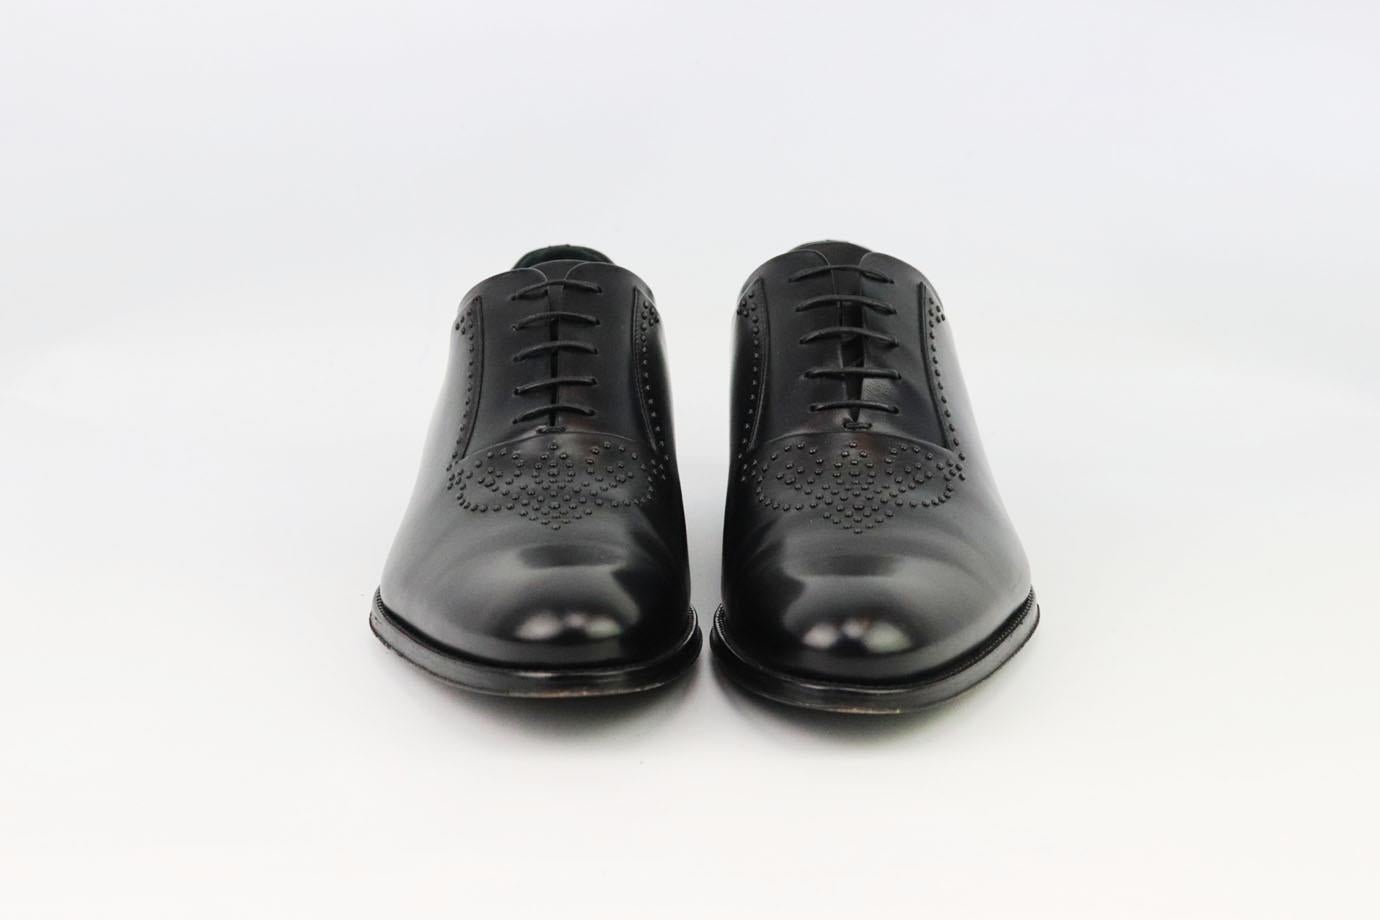 These Derby shoes by Louis Vuitton are hand-crafted to the highest specifications, the fine black leather and clean, sweeping lines create an unfailingly elegant appearance and finished with stud detail on the top. Sole measures approximately 25 mm/